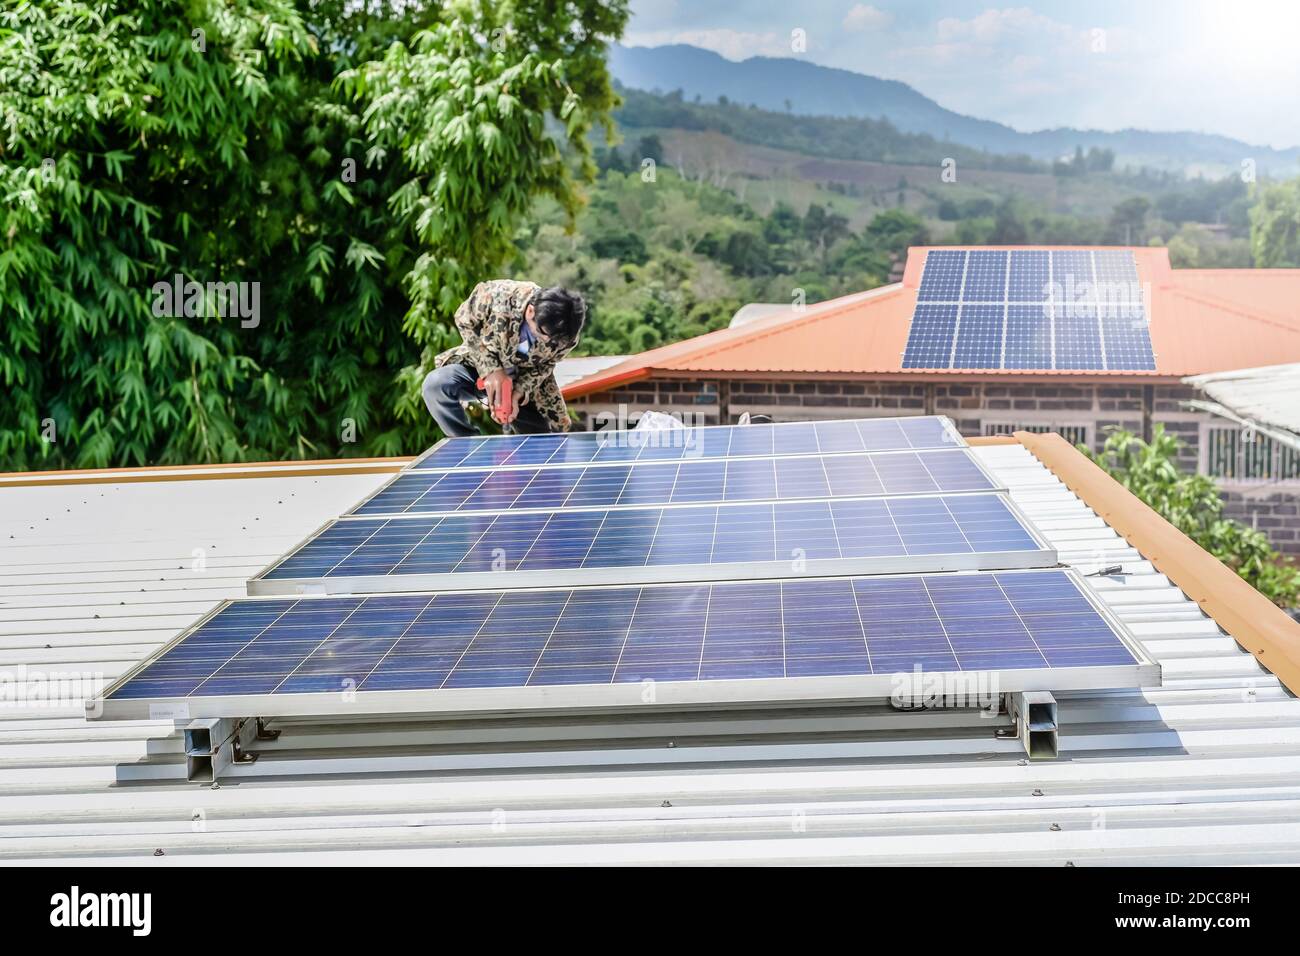 man installing solar panels on a roof house for alternative energy photovoltaic safe energy. power from nature sun power solar cell generator. Stock Photo